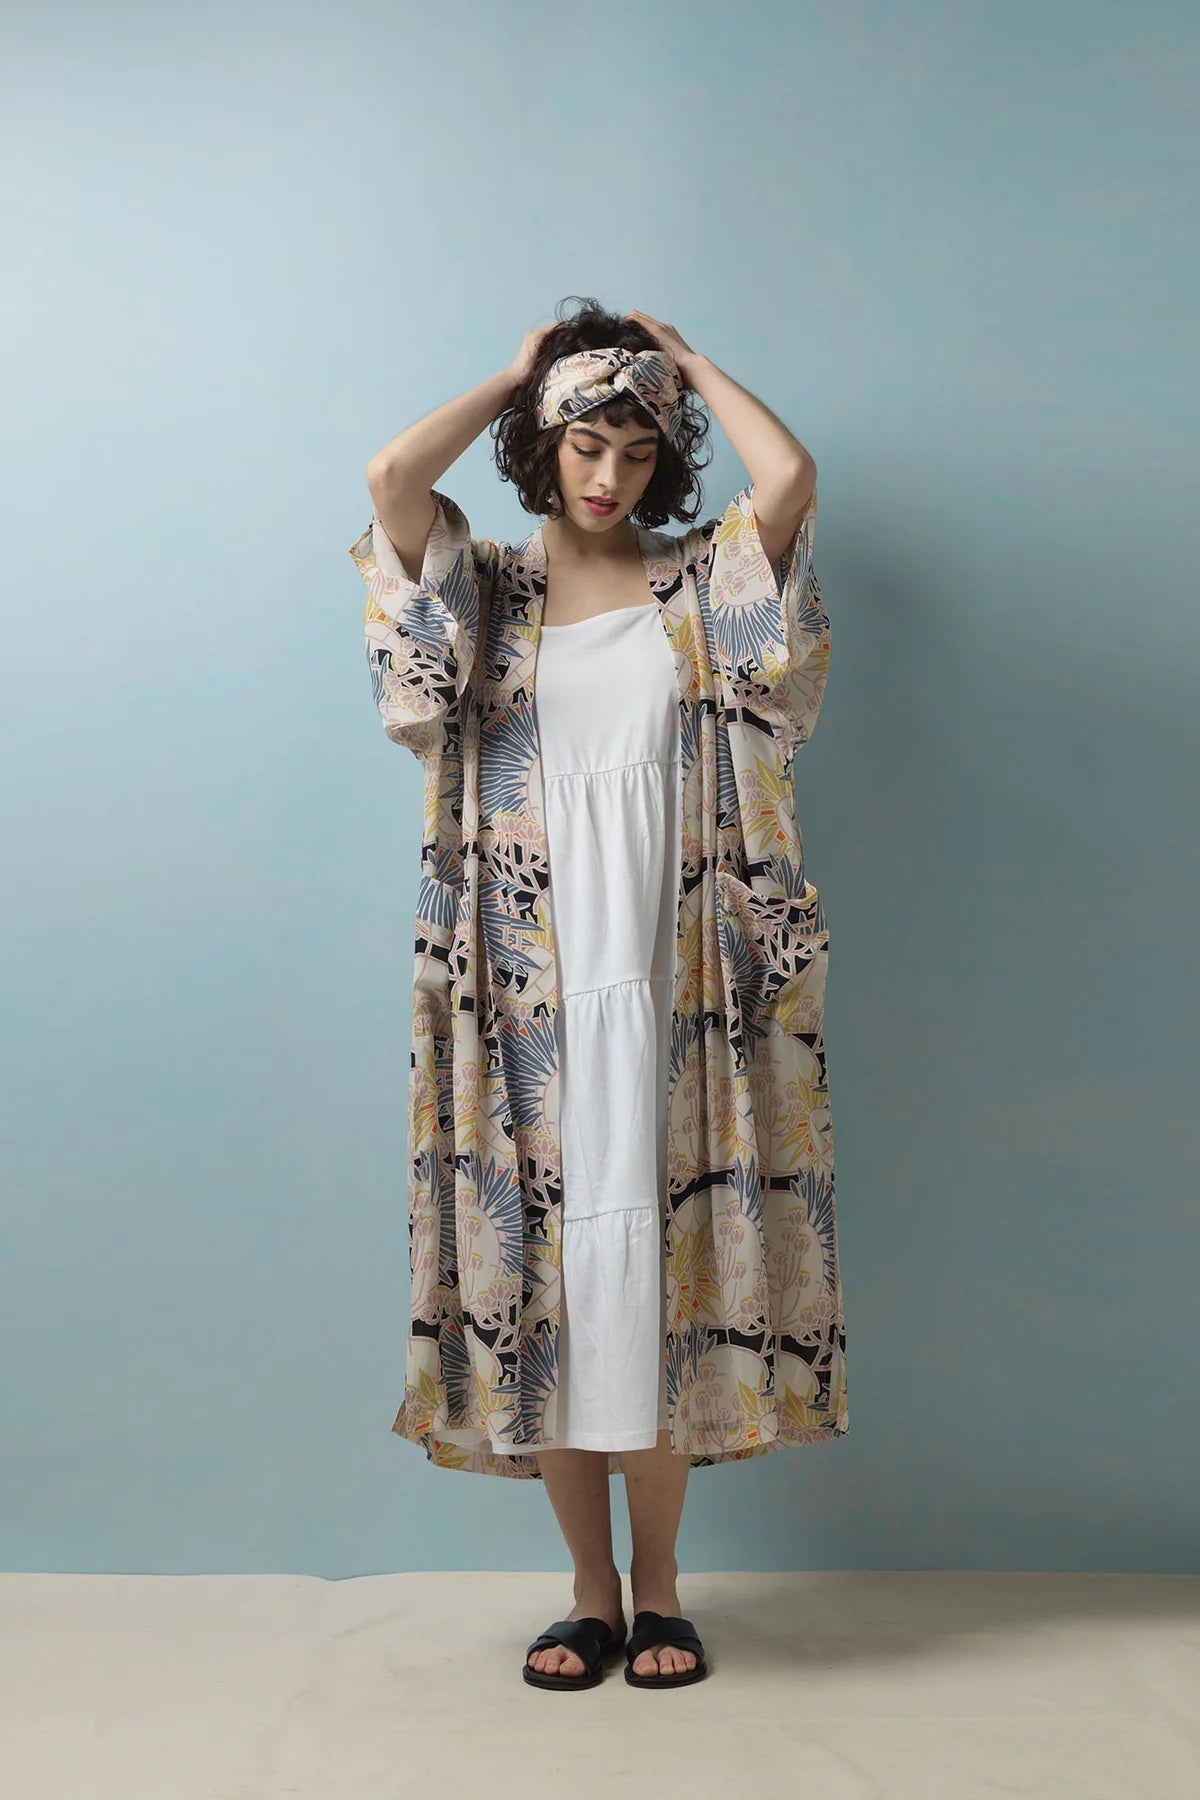 Deco Daisy Crepe Gown - The Nancy Smillie Shop - Art, Jewellery & Designer Gifts Glasgow